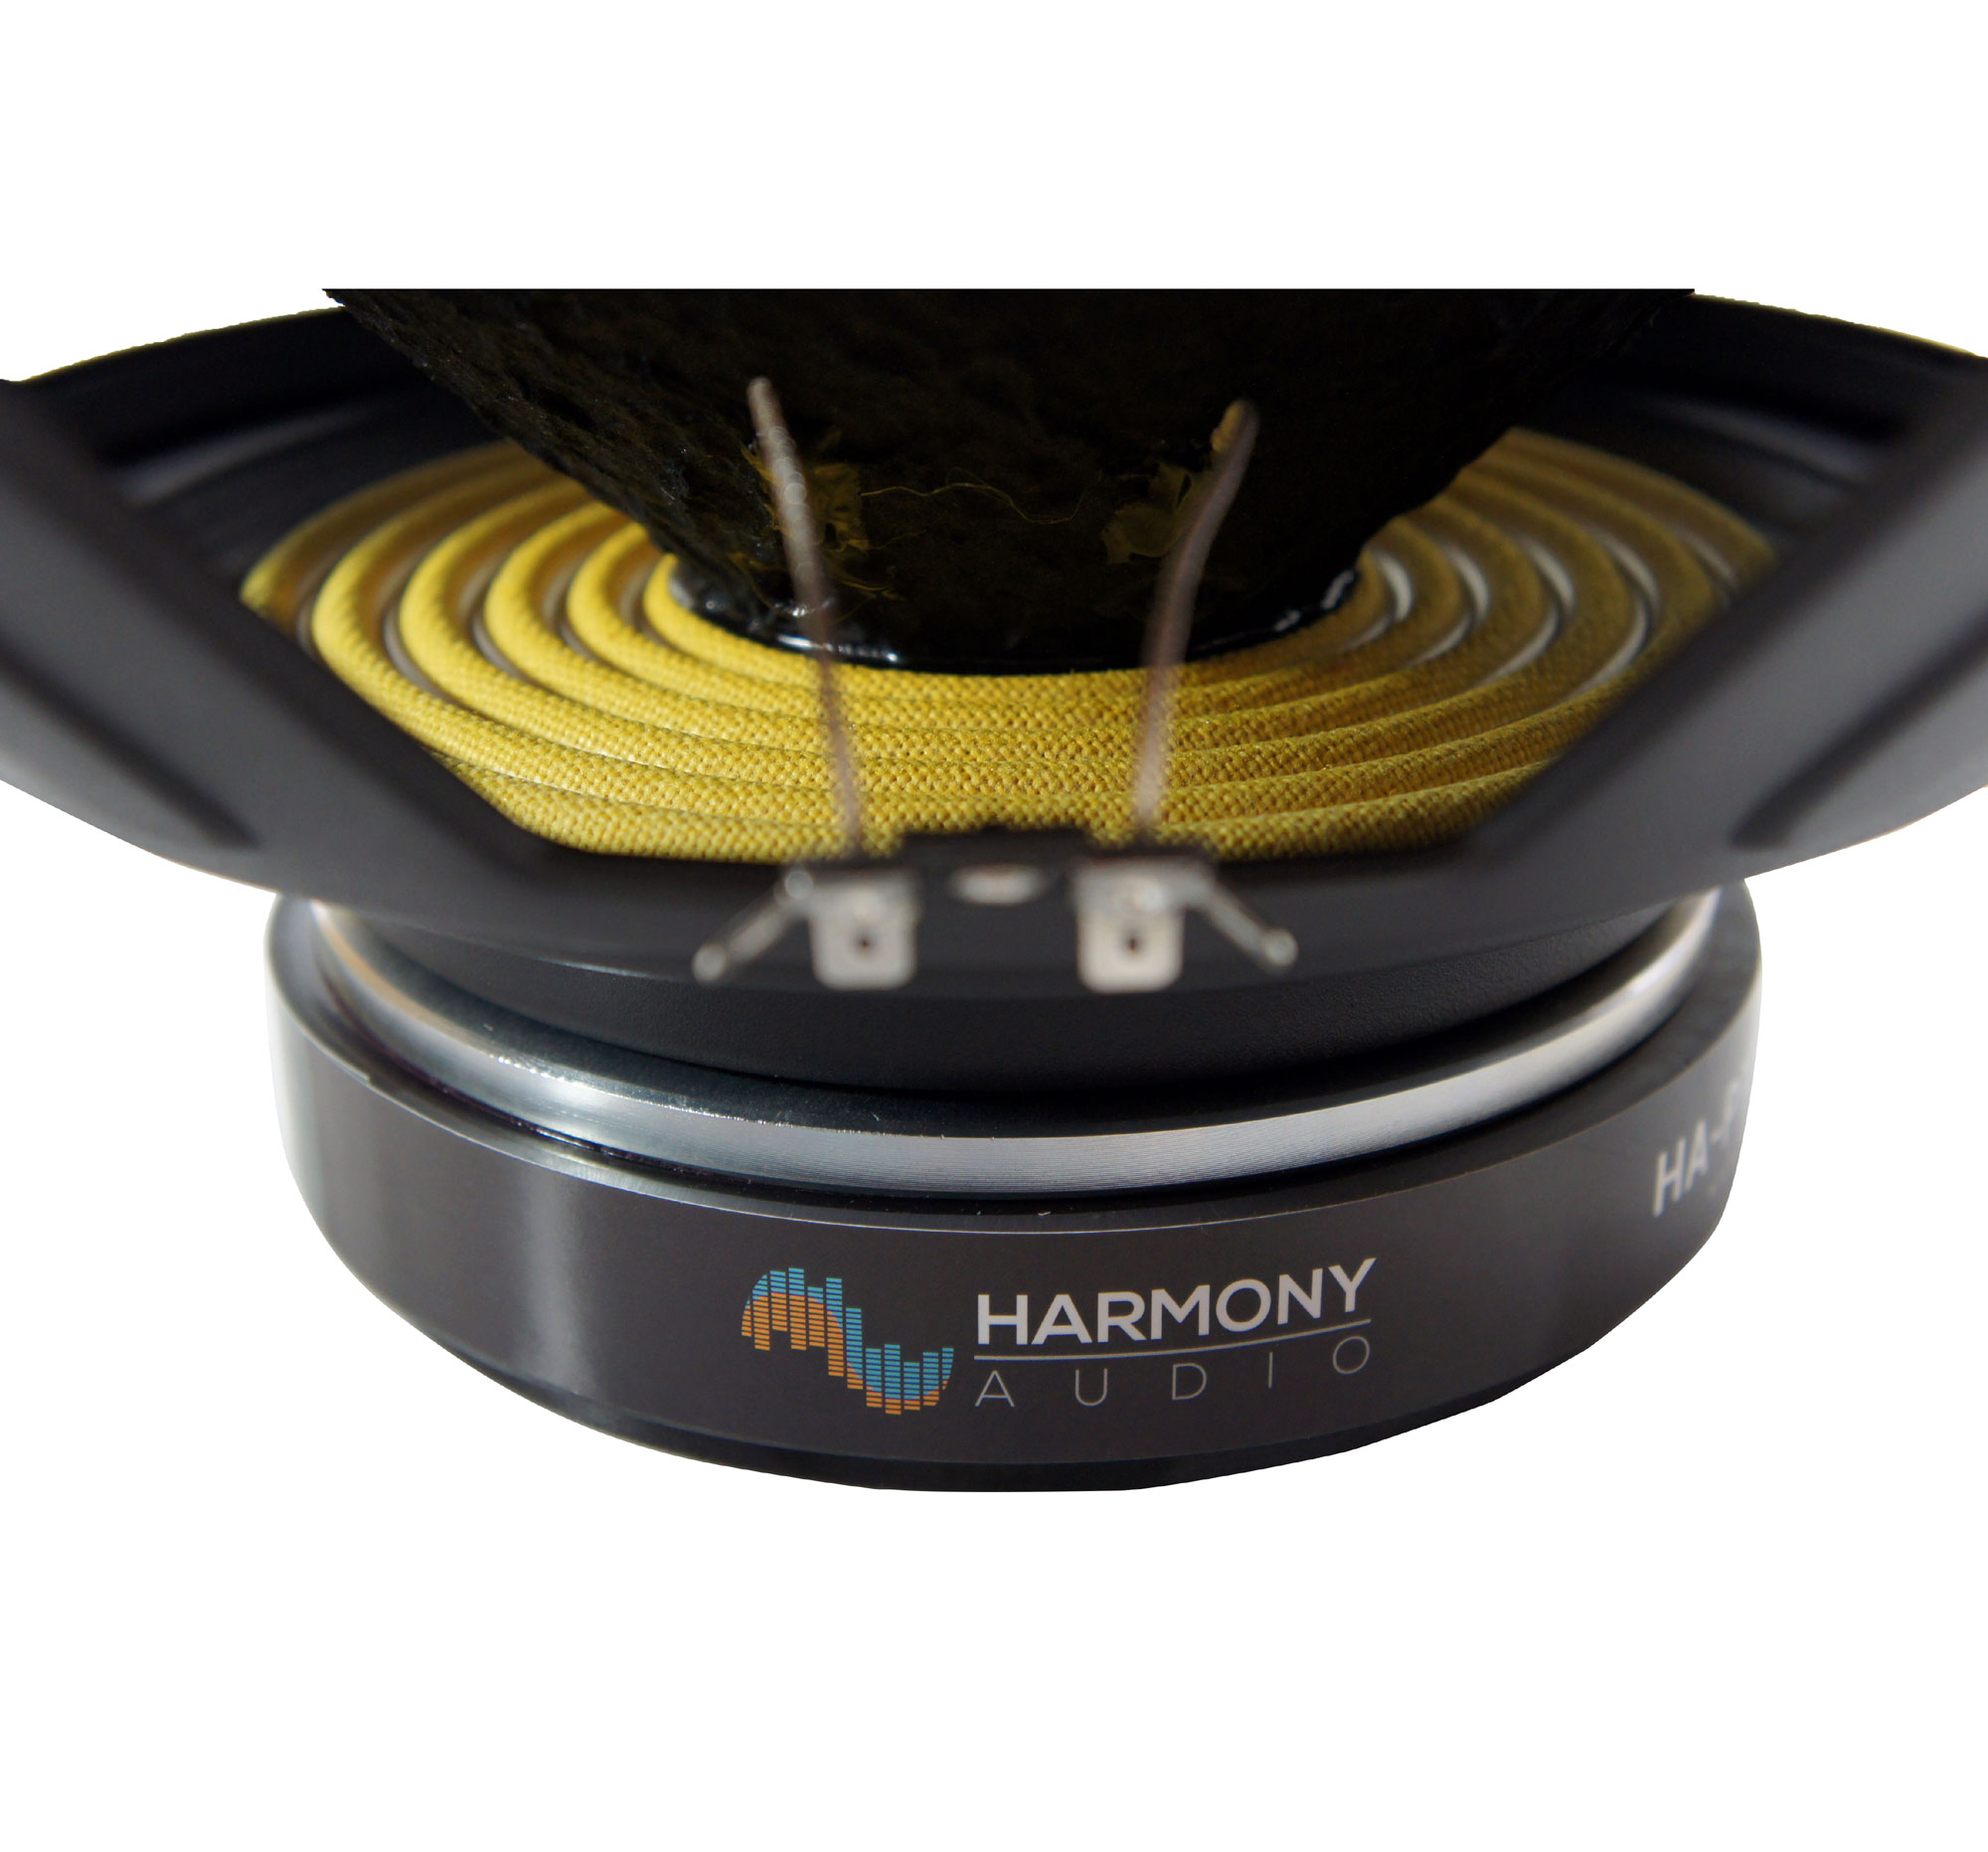 4x Harmony HA-P18"WS8 Raw Replacement 18" Pro PA 1200W Sub Speaker 8 Ohm Woofer - image 5 of 6